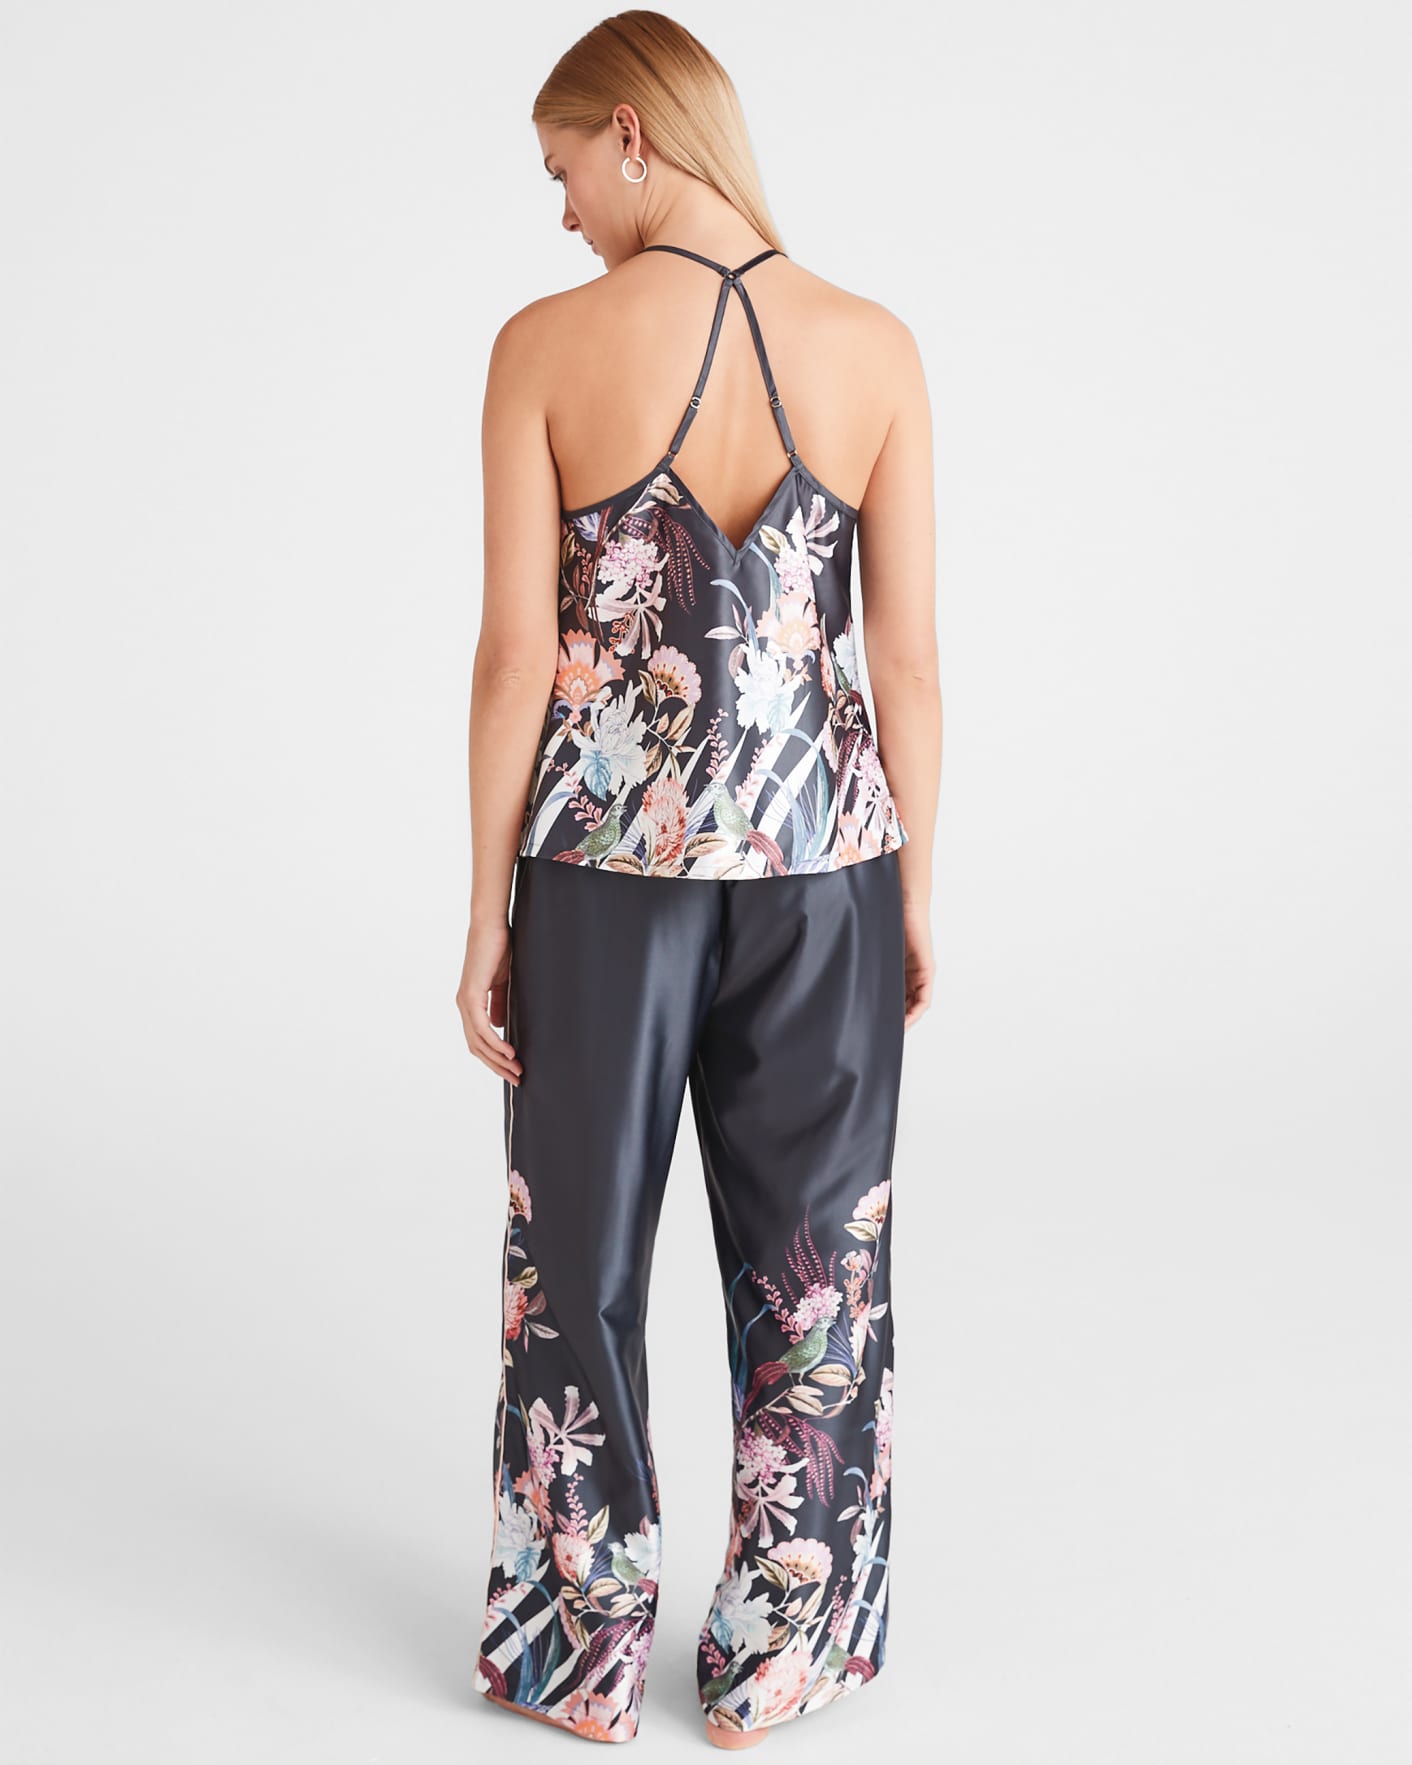 Charcoal Printed Satin Cami Top Ted Baker